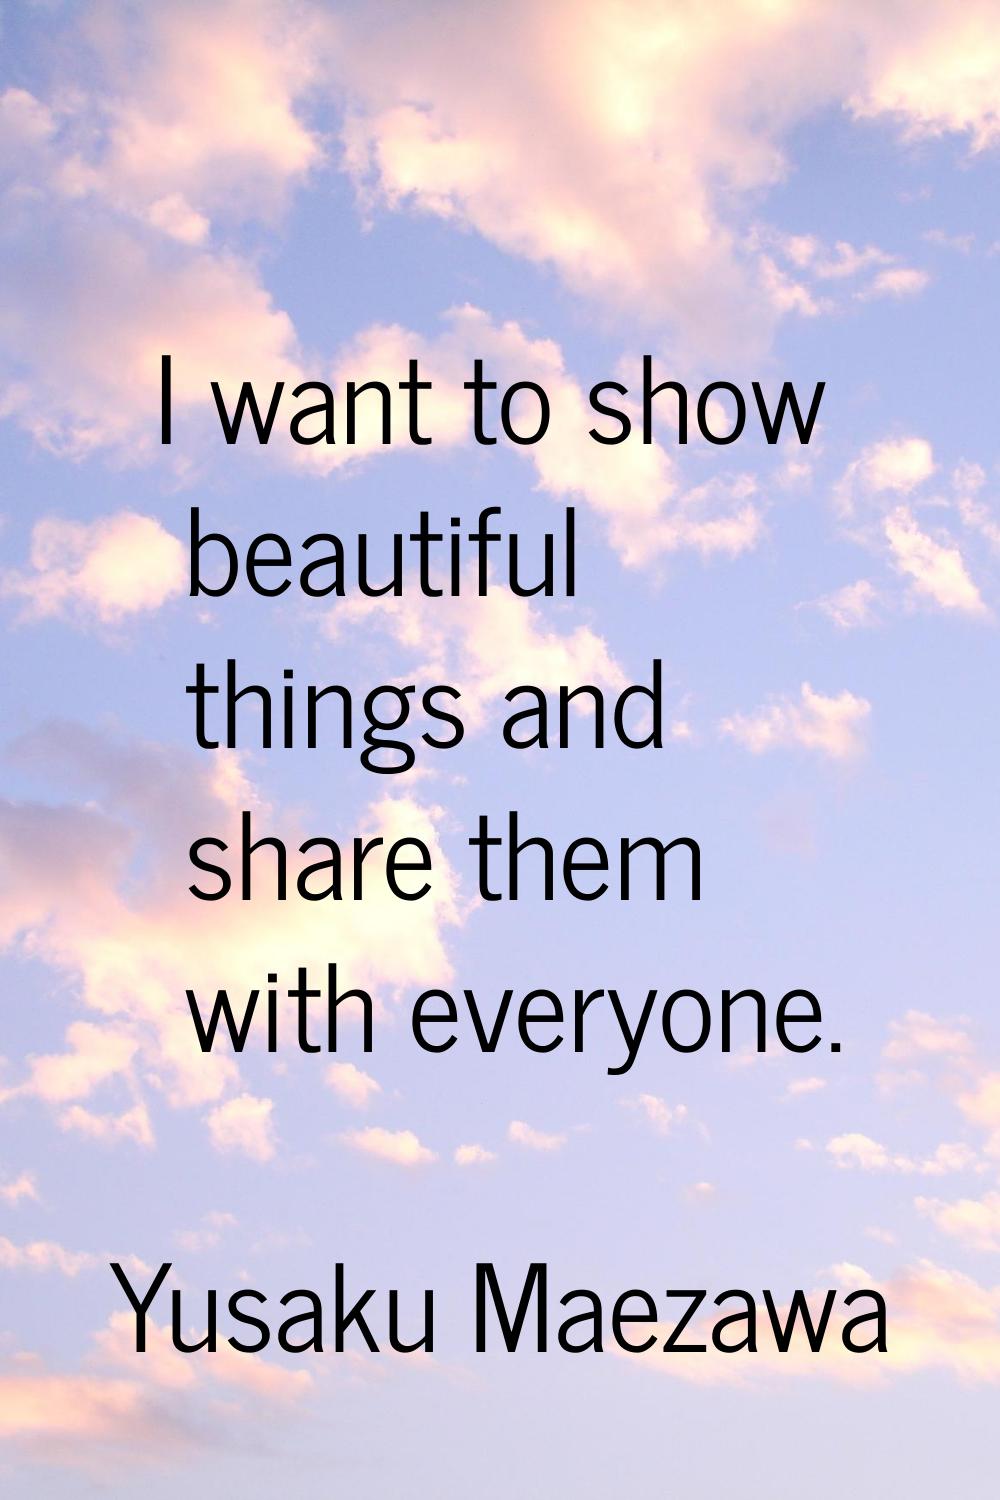 I want to show beautiful things and share them with everyone.